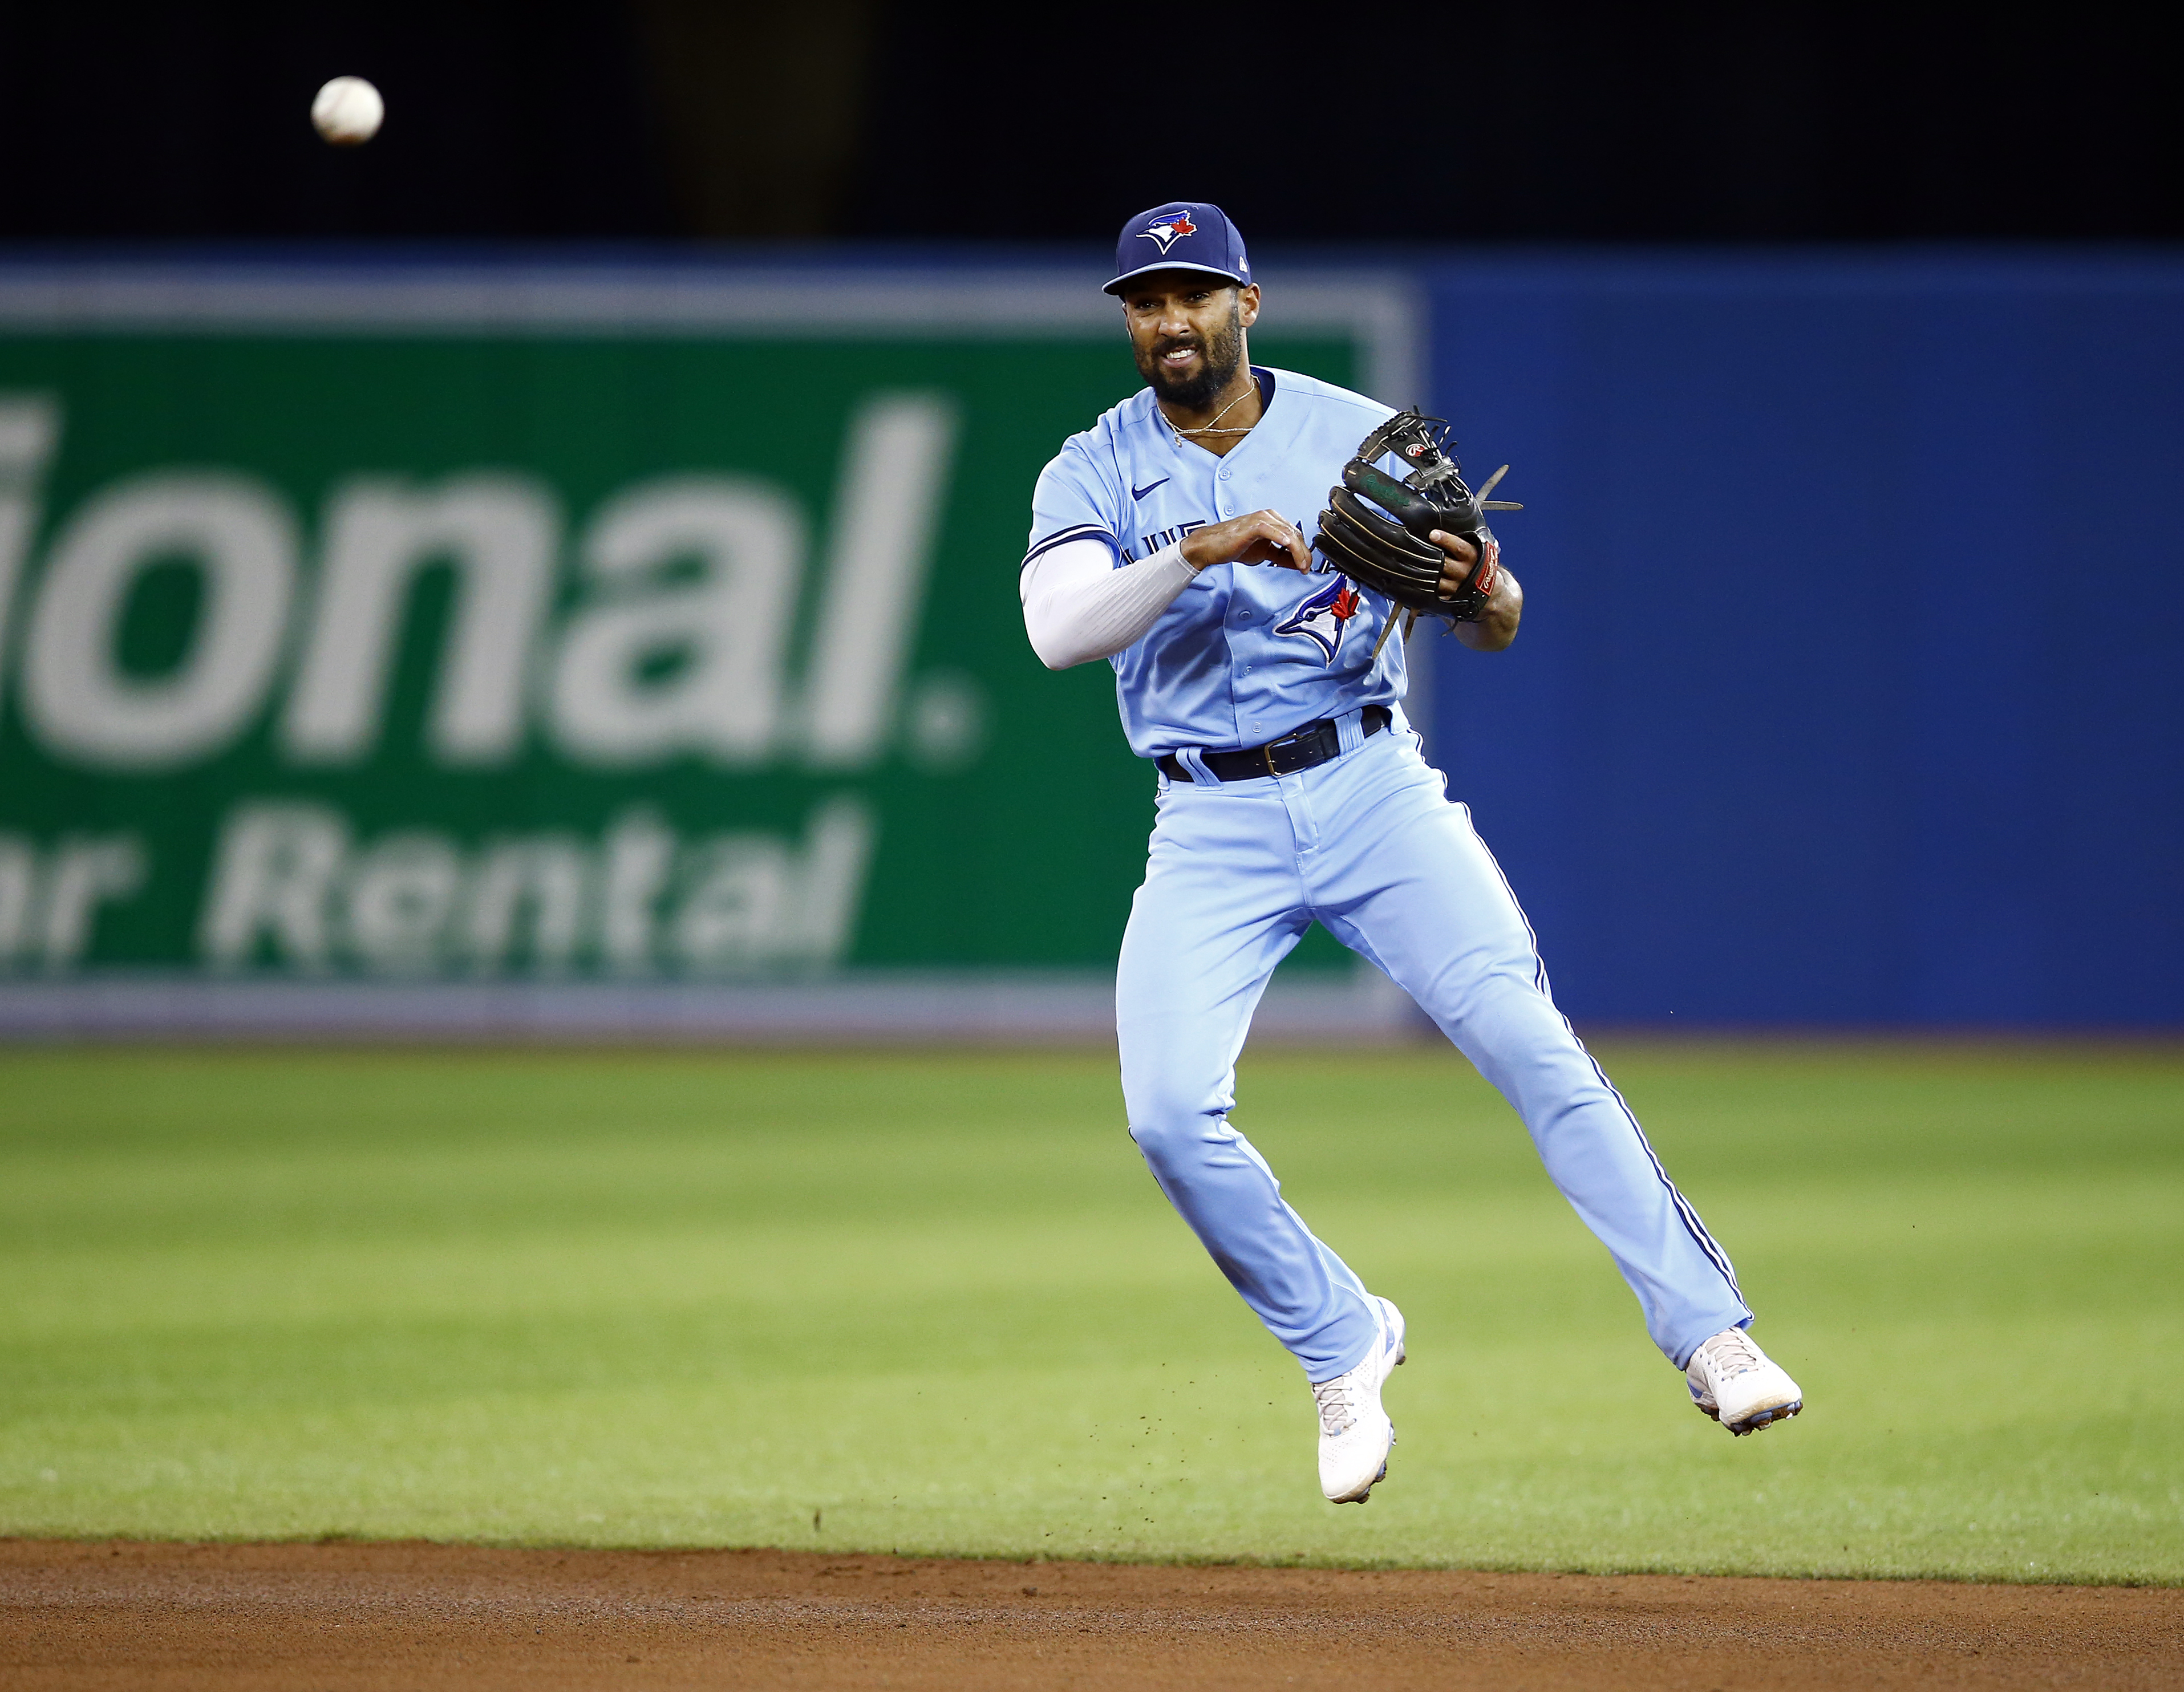 Marcus Semien #10 of the Toronto Blue Jays throws to first base during a MLB game against the New York Yankees at Rogers Centre on September 29, 2021 in Toronto, Ontario, Canada.